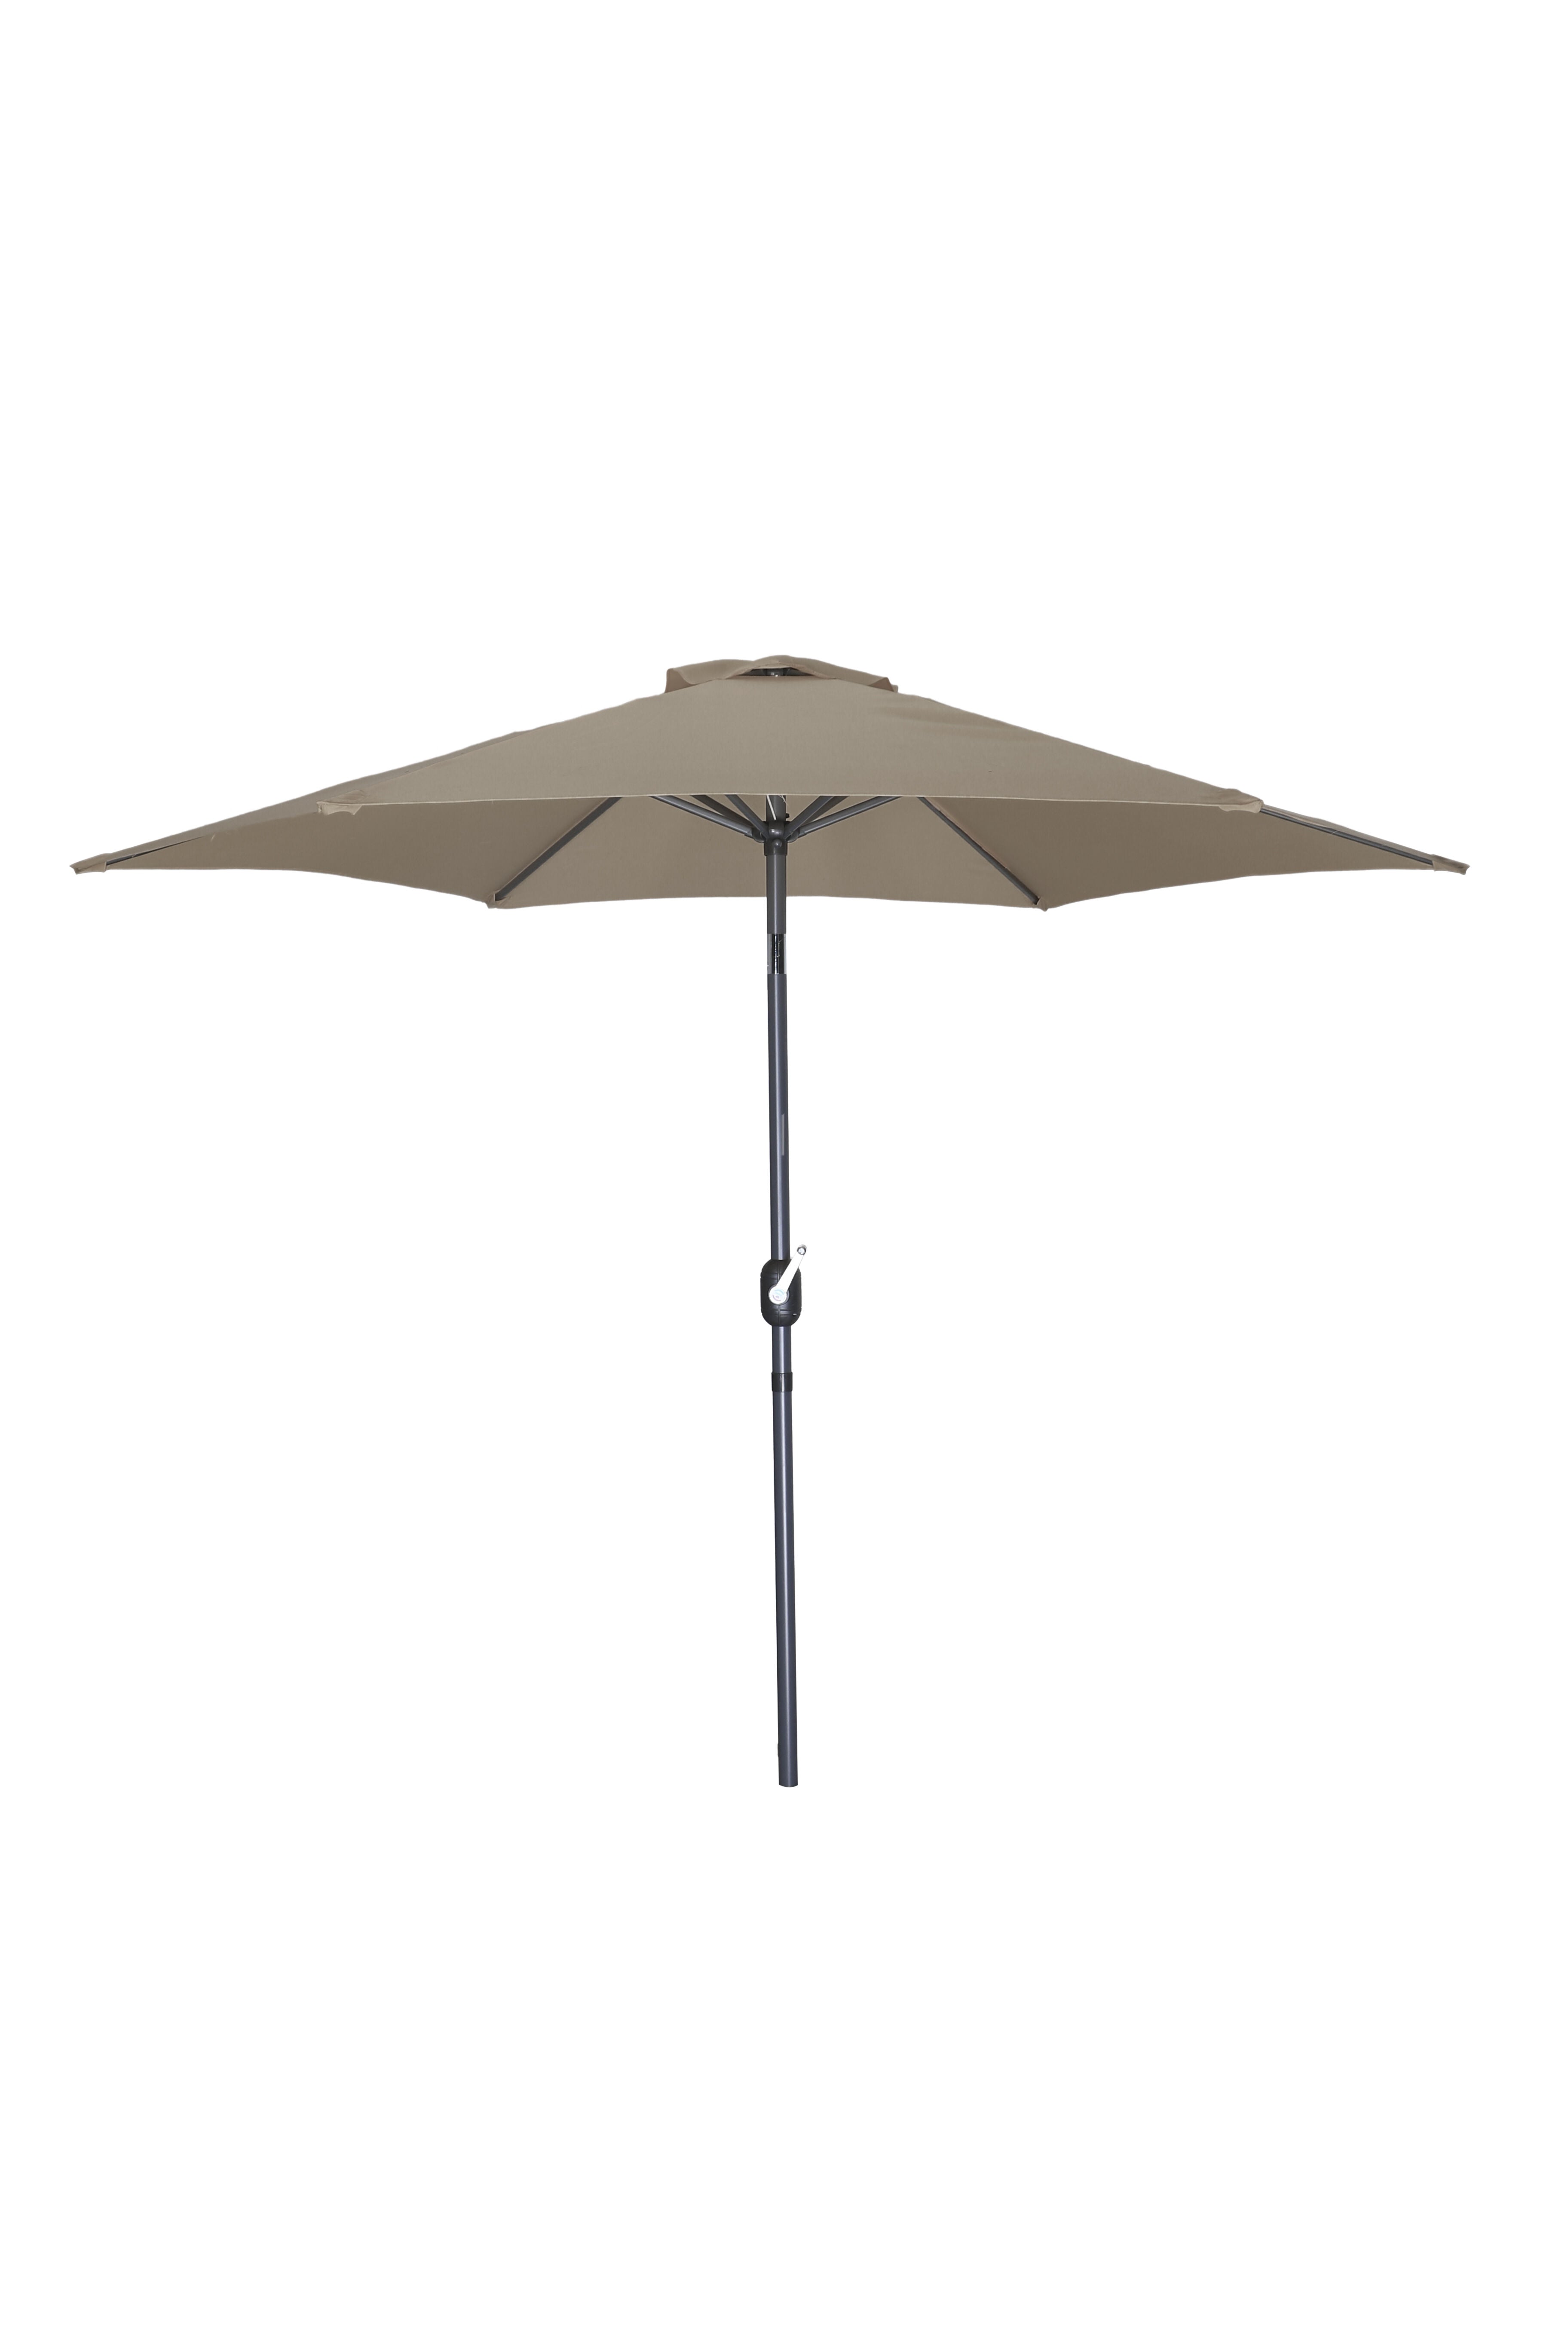 PatioZone 9' Tilting Market Umbrella (Cover Incl.) in UV-Protected Polyester (MOSS-T1204S) - Sand